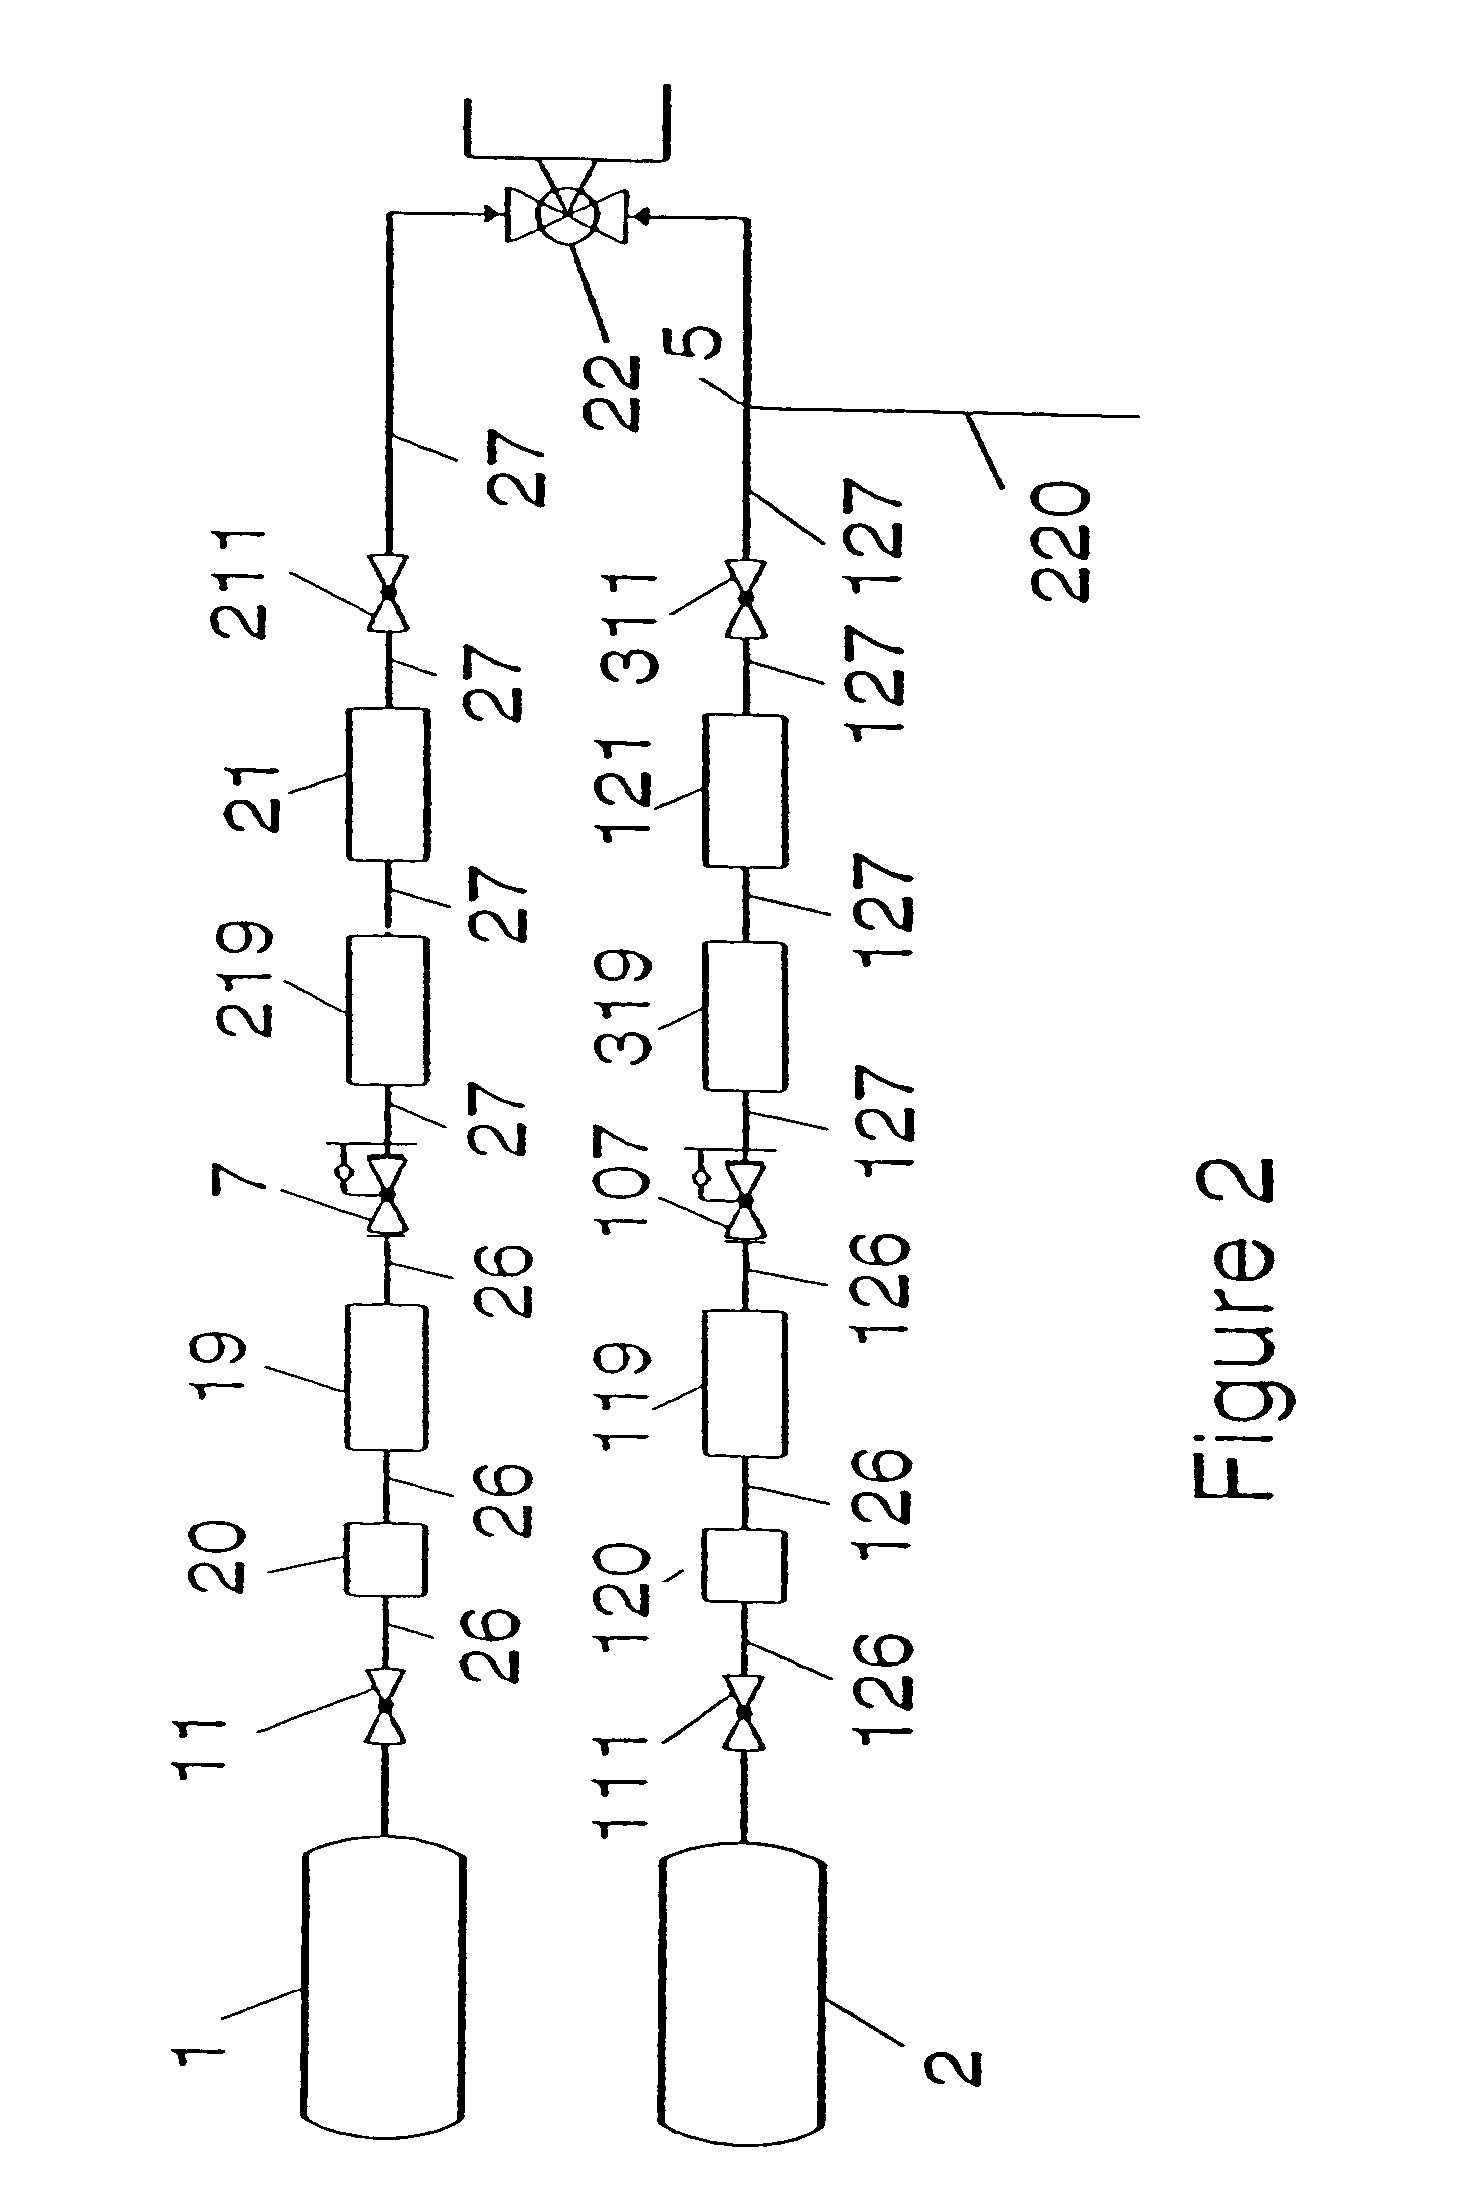 Engine having external combustion chamber